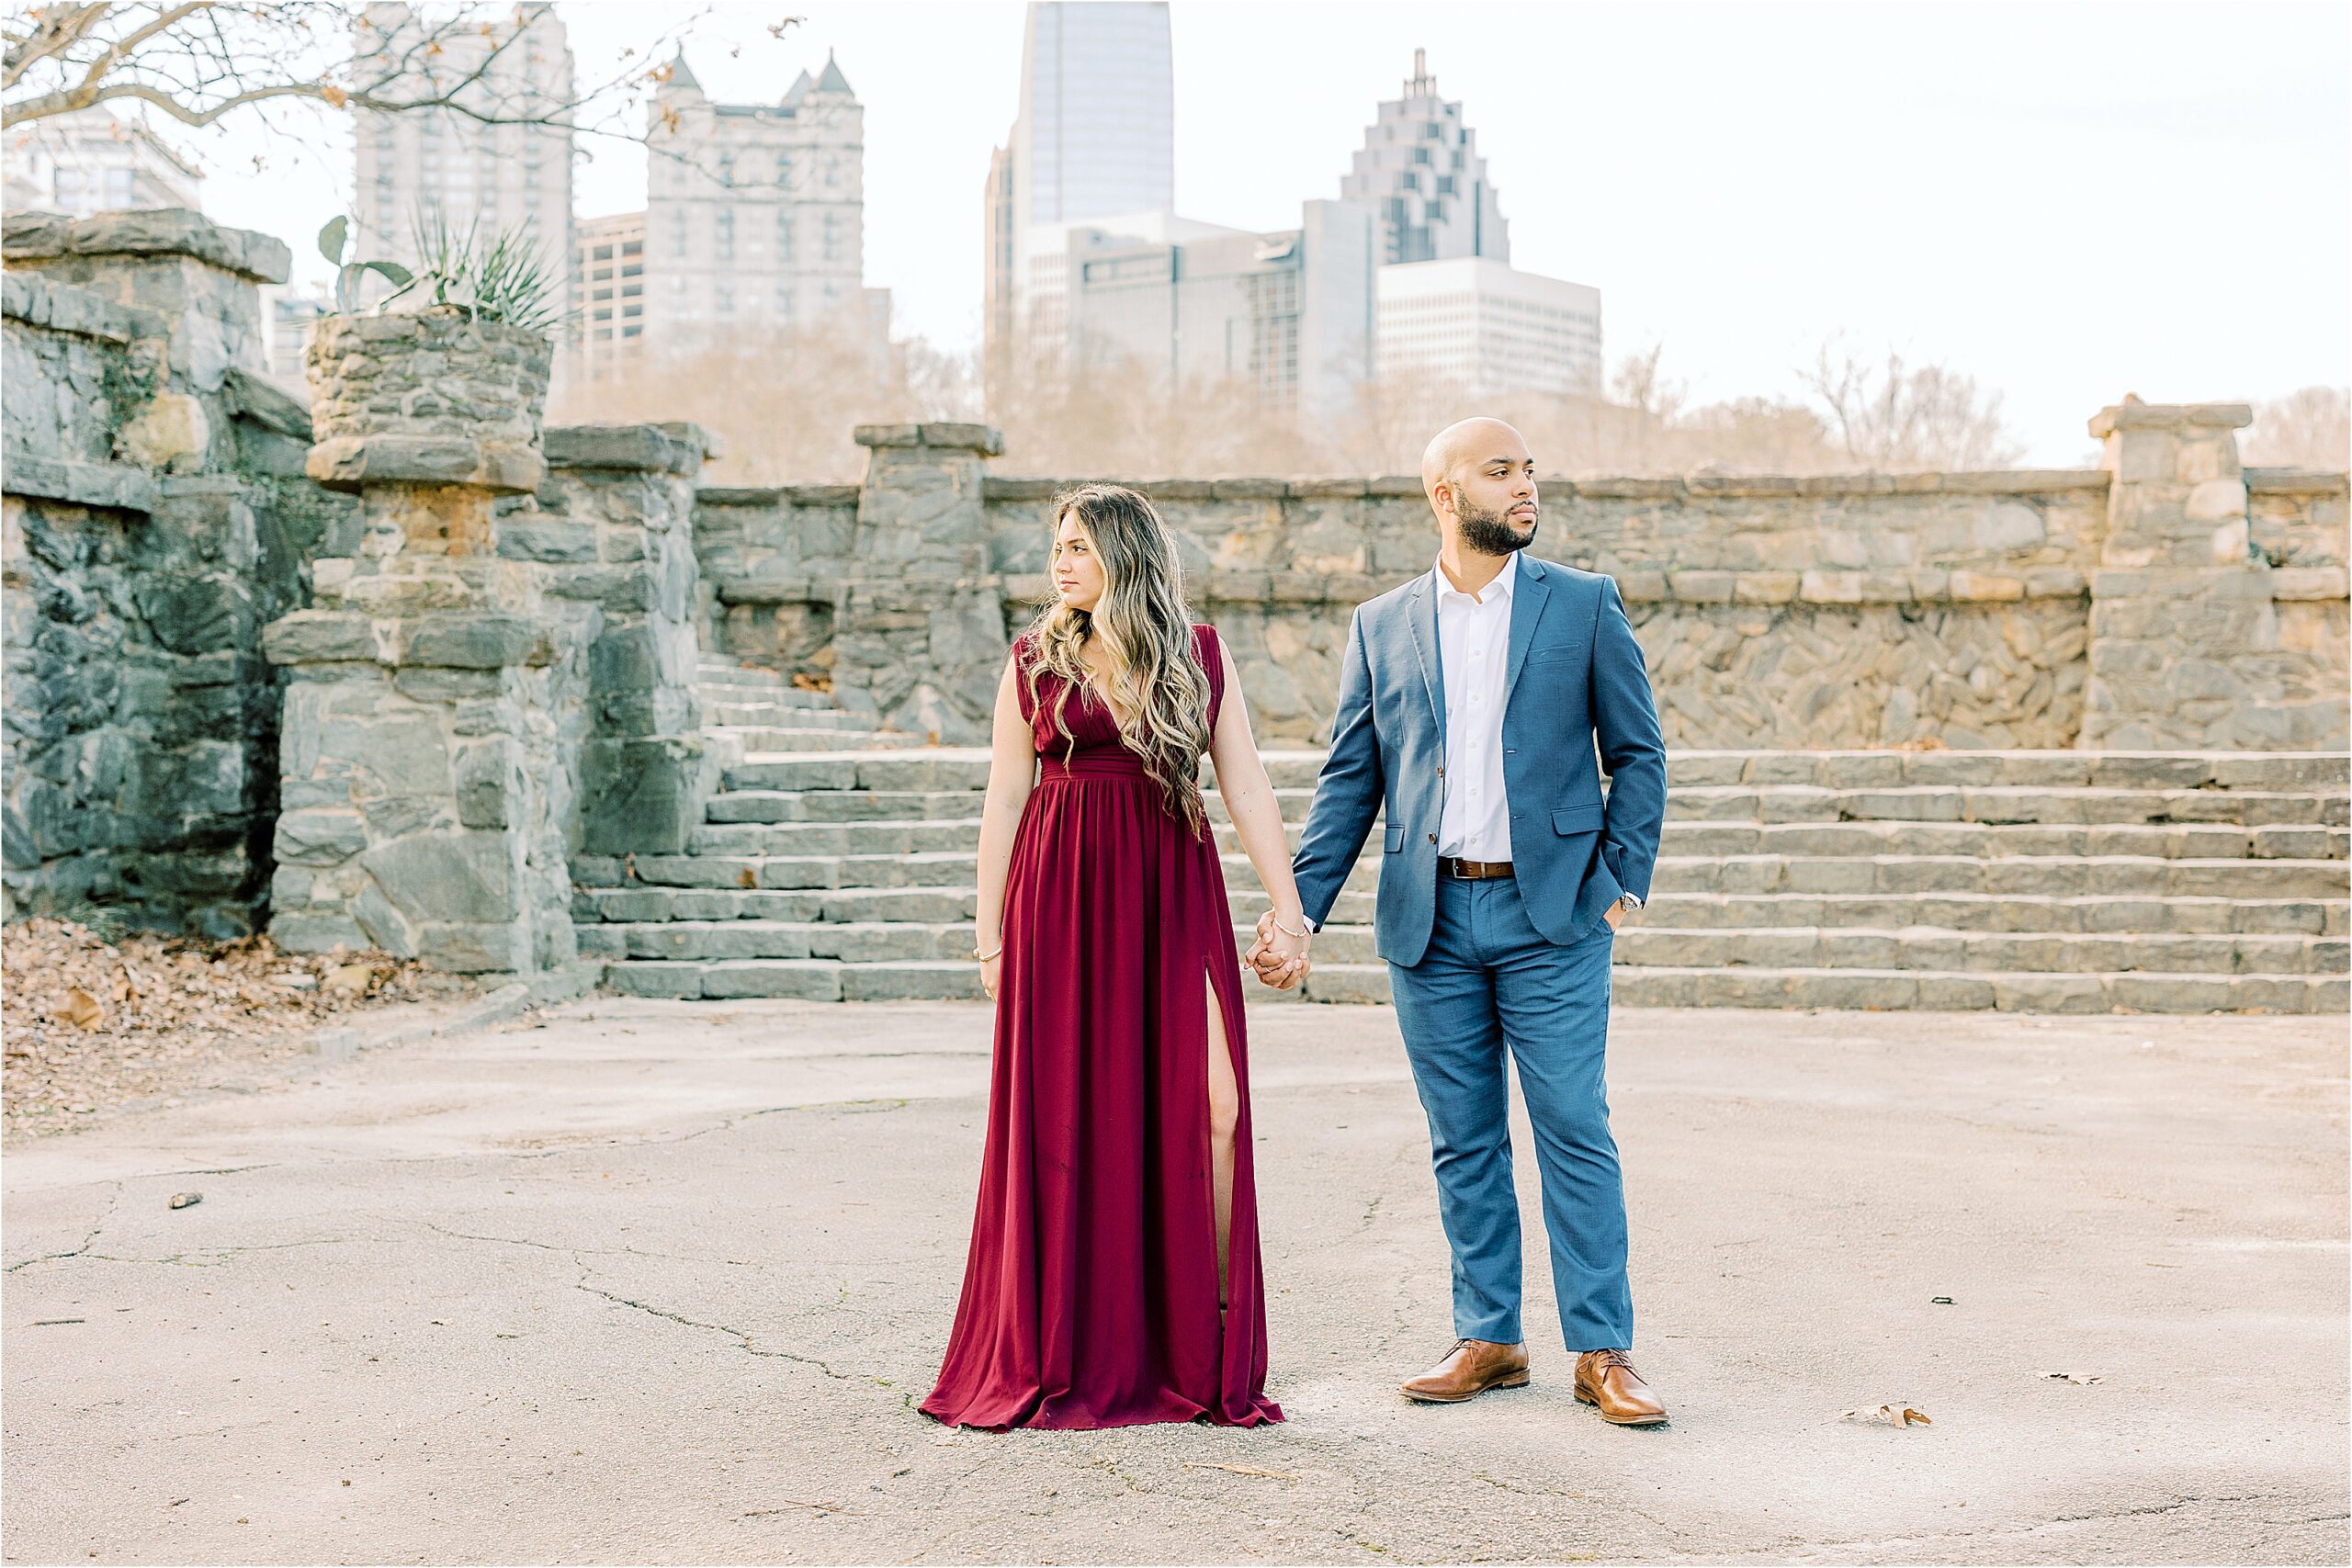 couple in piedmont park, Atlanta GA, wearing a red dress and a blue suit with a stone wall background